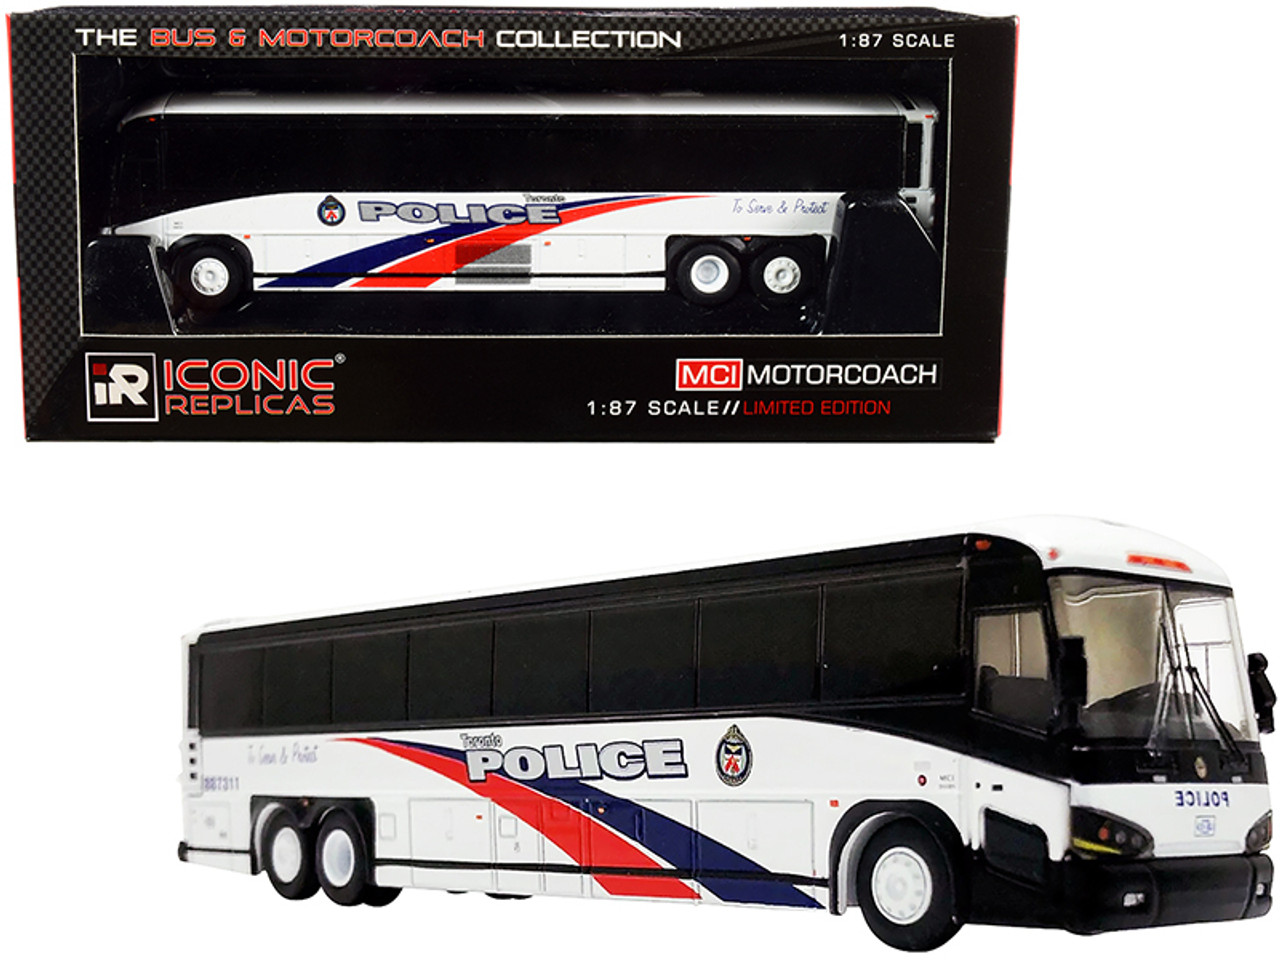 MCI D4505 Motorcoach Bus "Toronto Police" (Canada) White with Blue and Red Stripes "The Bus & Motorcoach Collection" 1/87 (HO) Diecast Model by Iconic Replicas